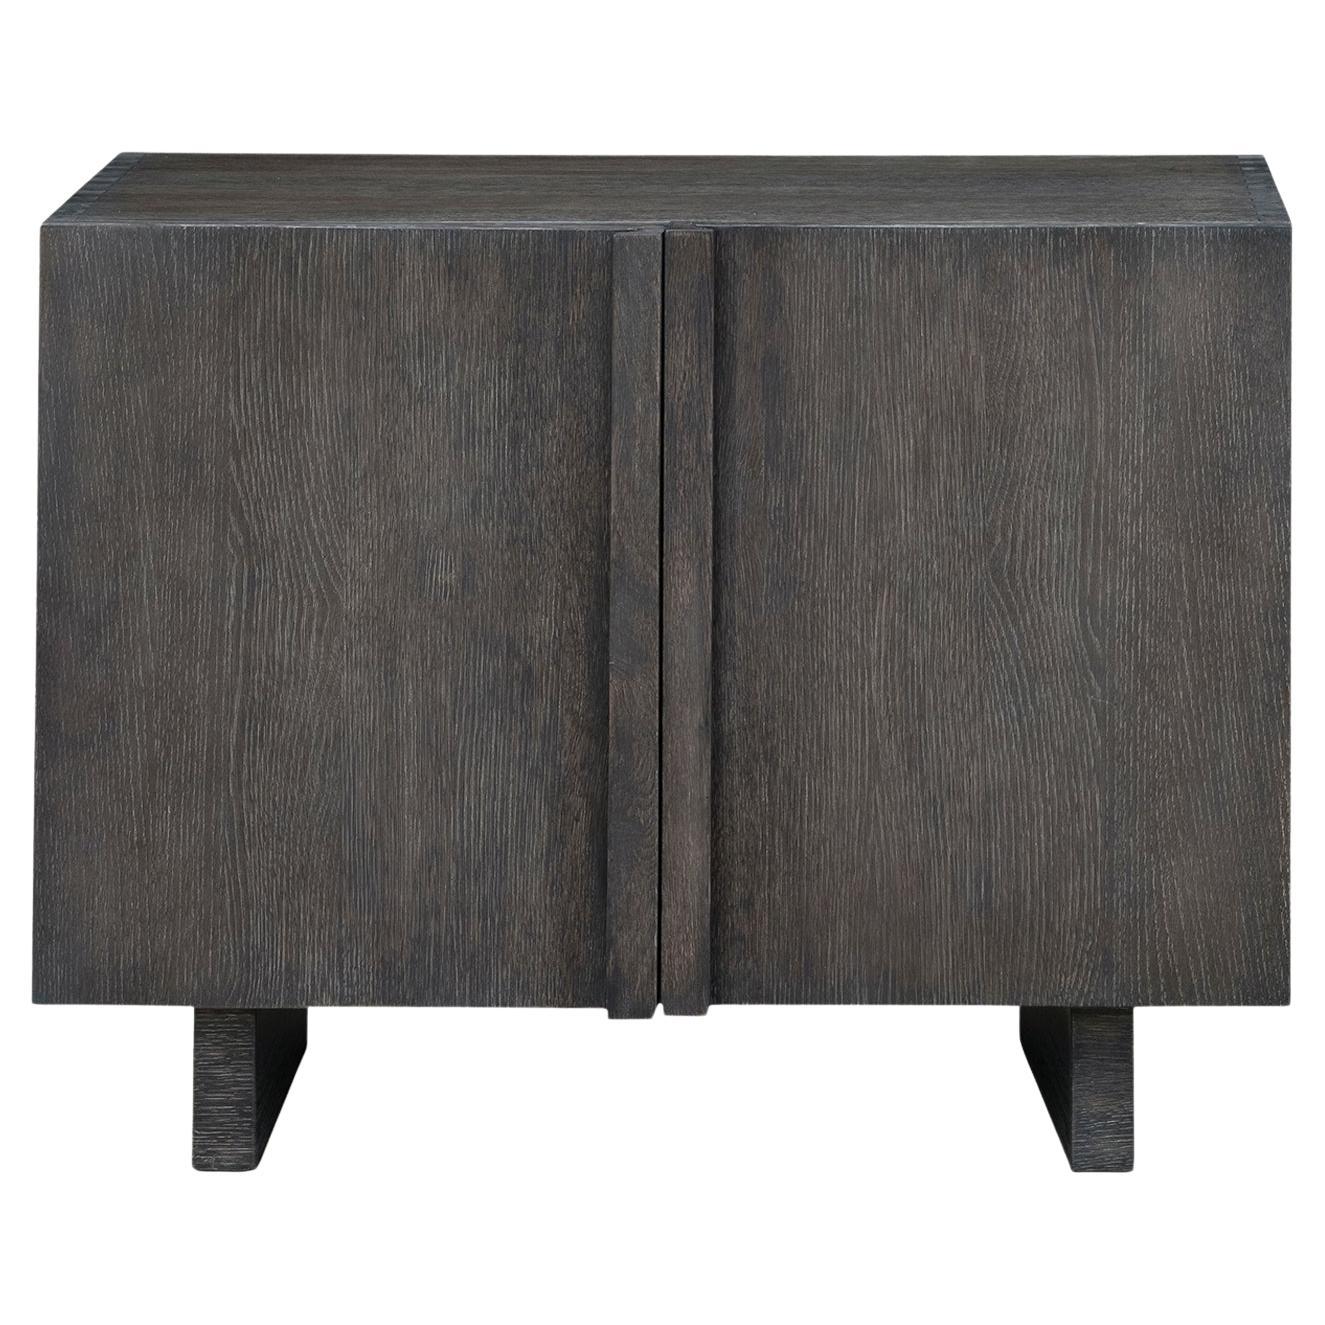 "Carrel" Modern French Oak Media Cabinet 'Small' by Christiane Lemieux For Sale